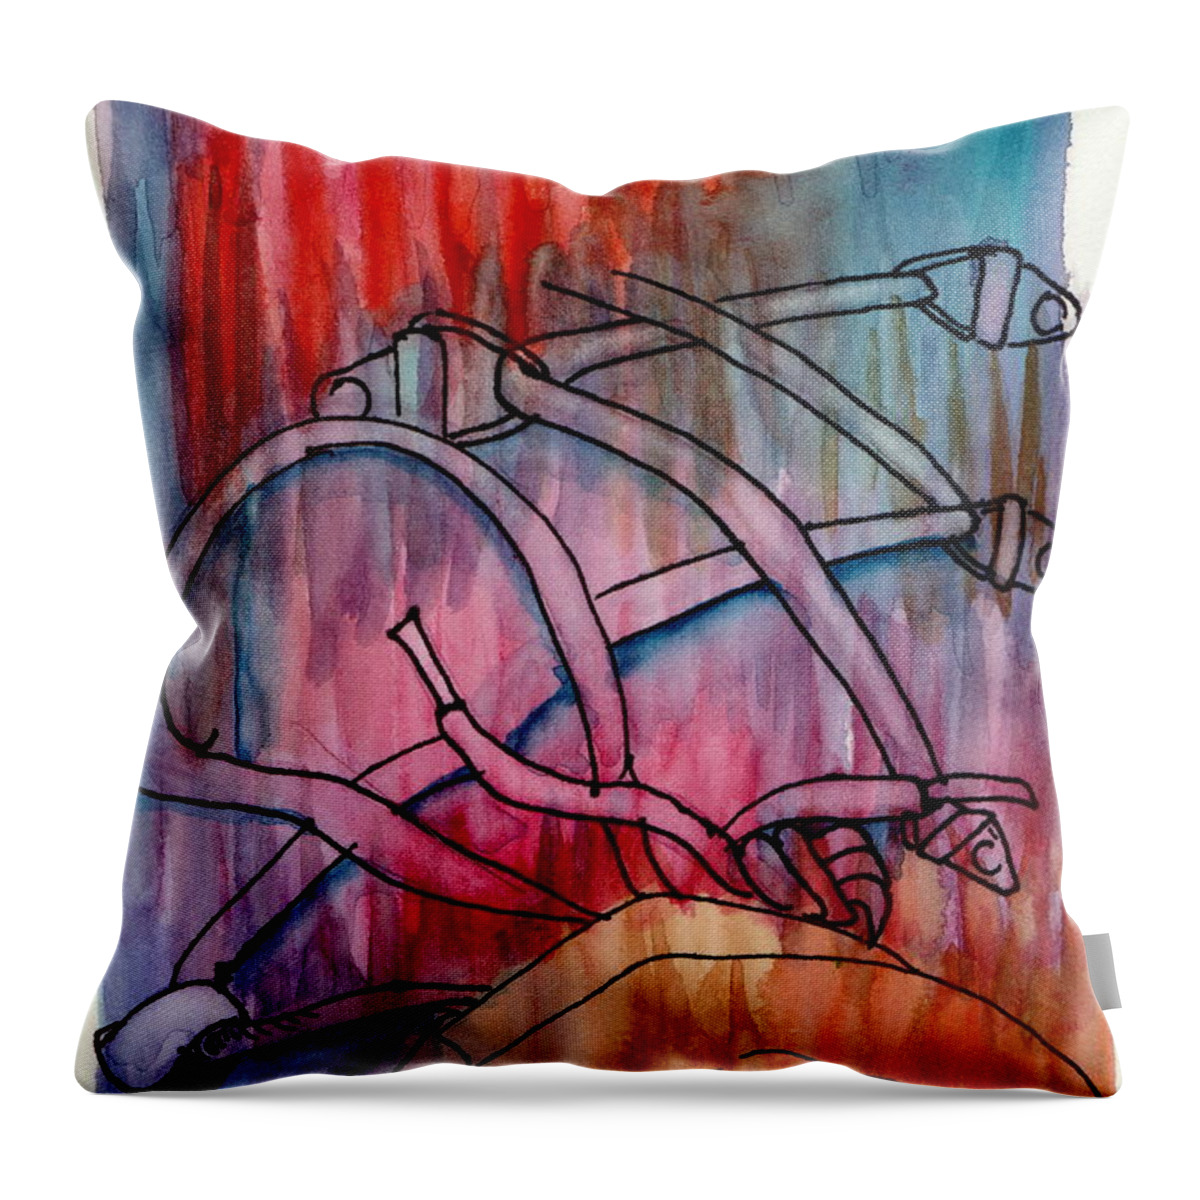 Multi Color Throw Pillow featuring the painting Next Step by Tammy Nara